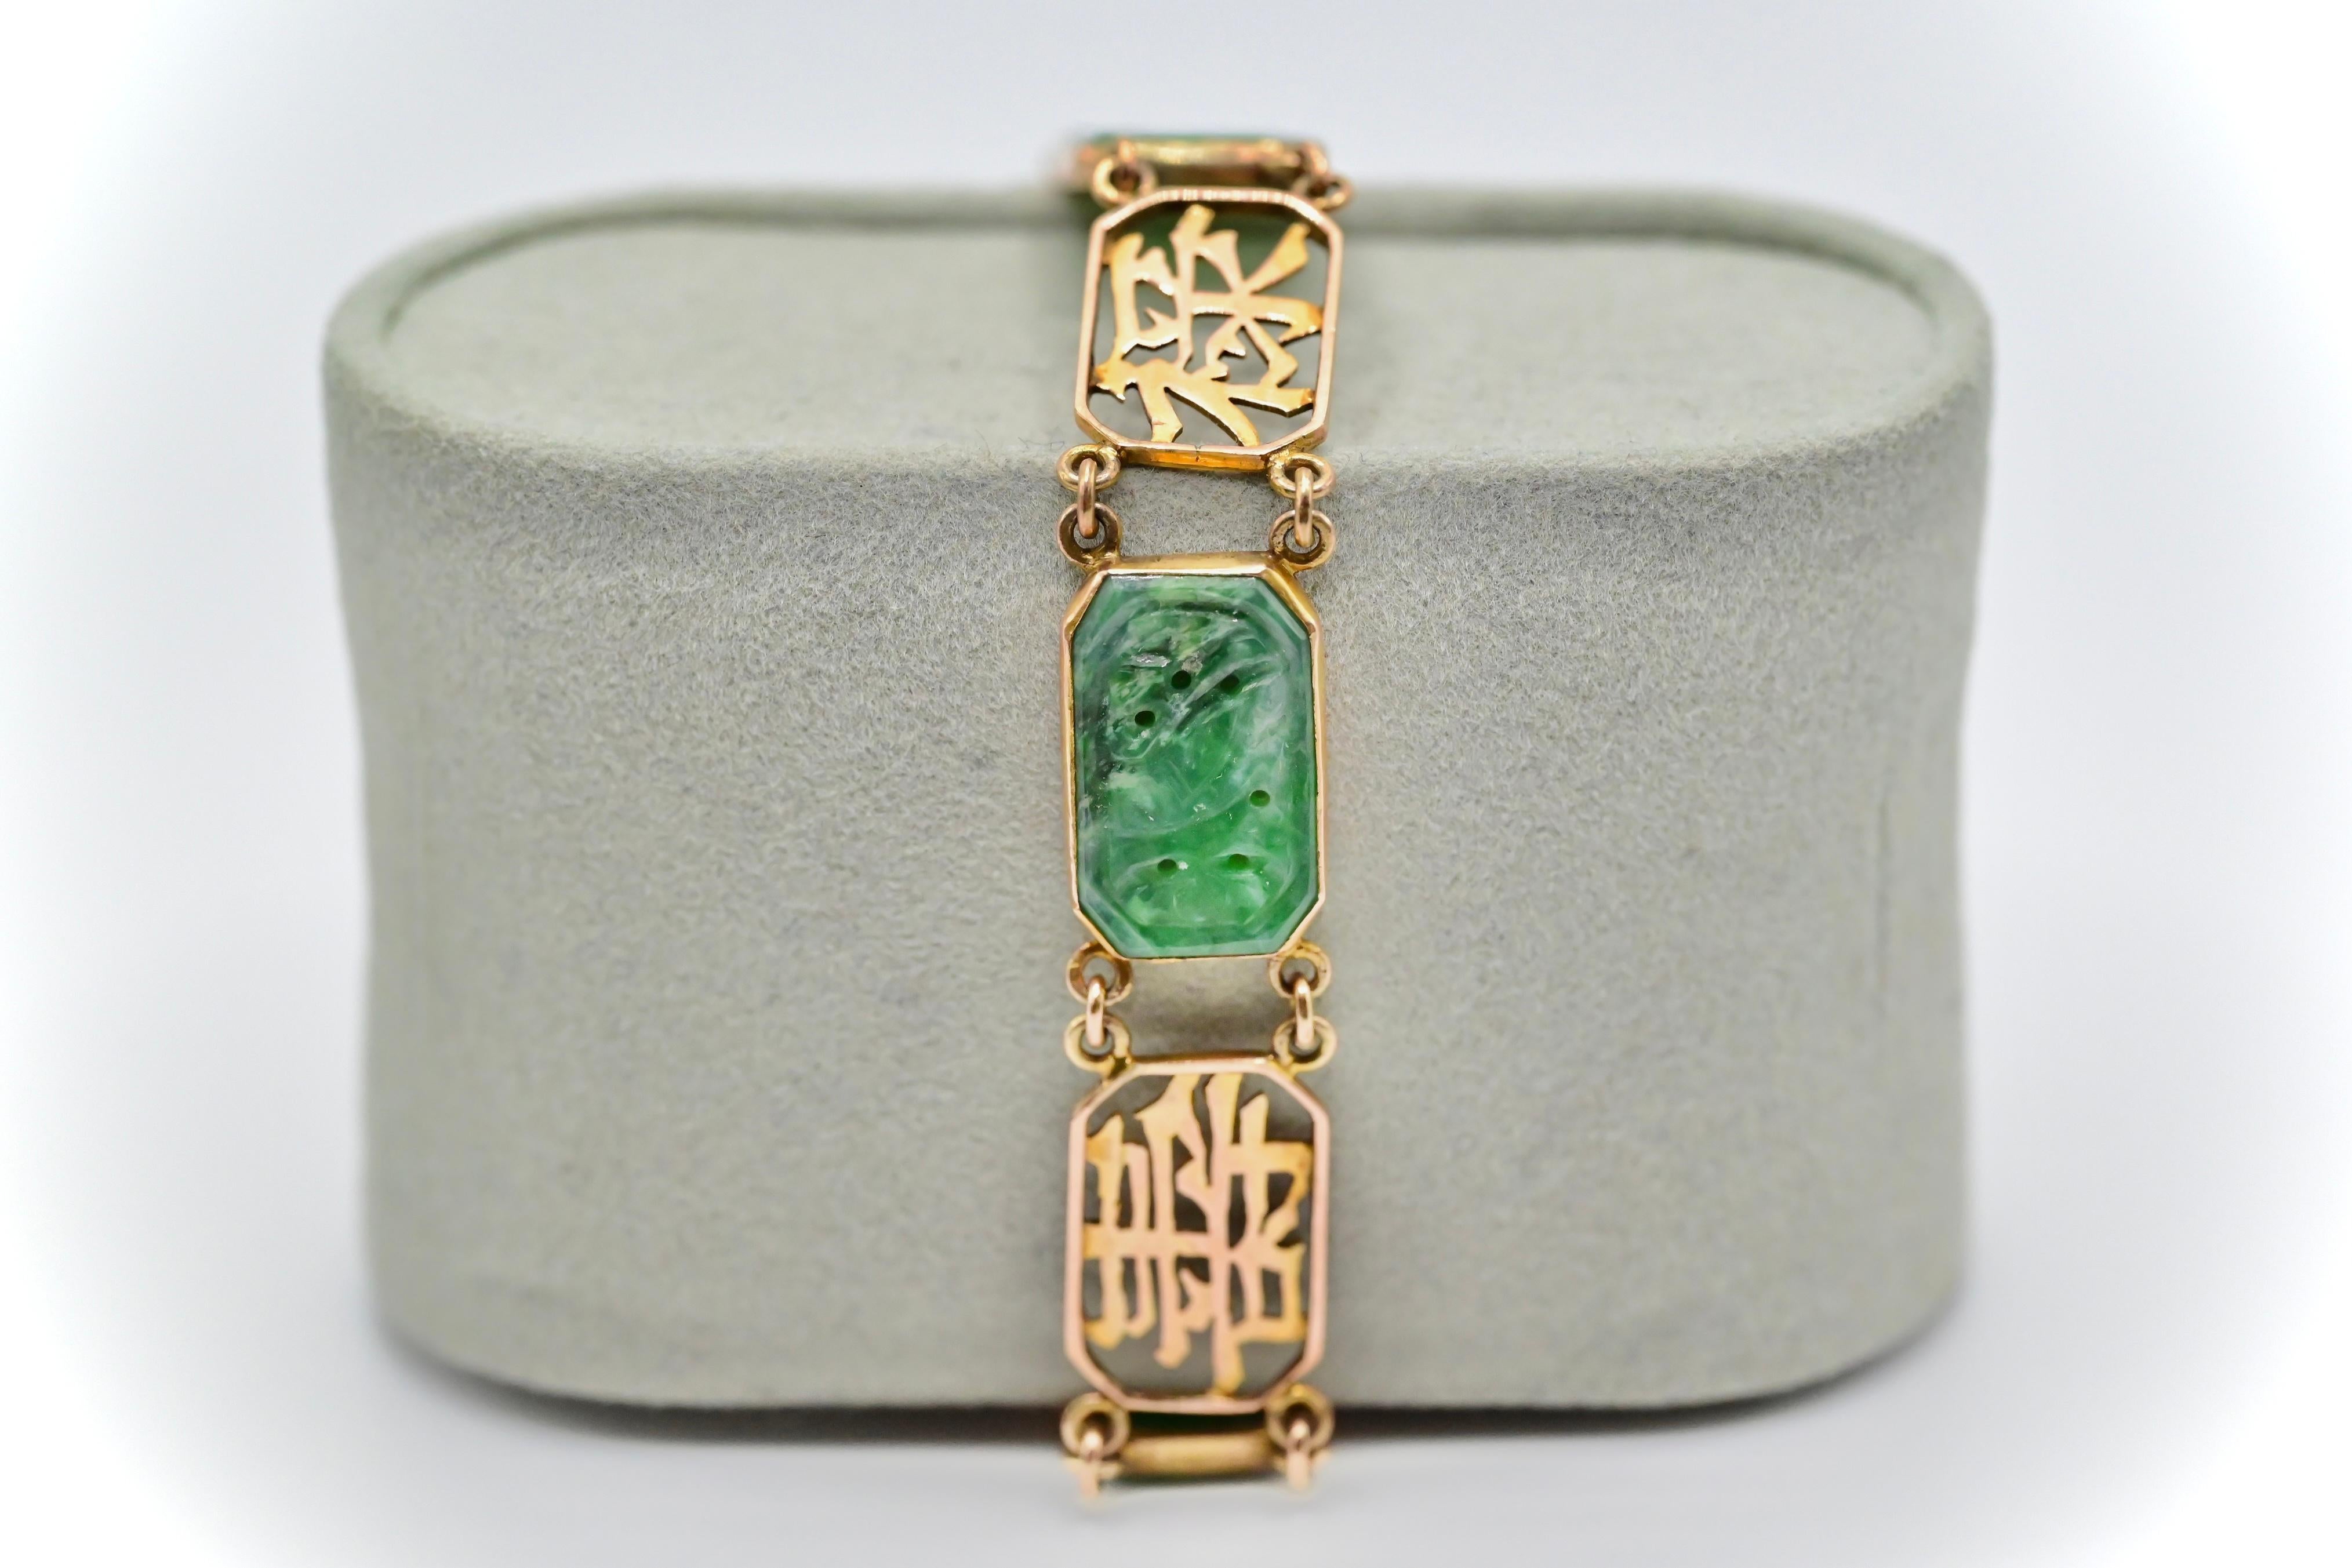 This is a gorgeous 14k yellow gold bracelet made with exquisite carved green jade, and gold cut out Chinese characters going around the bracelet. The bracelet is in good condition with small wears. It weighs 11 grams, and stands at 12mm tall. If you